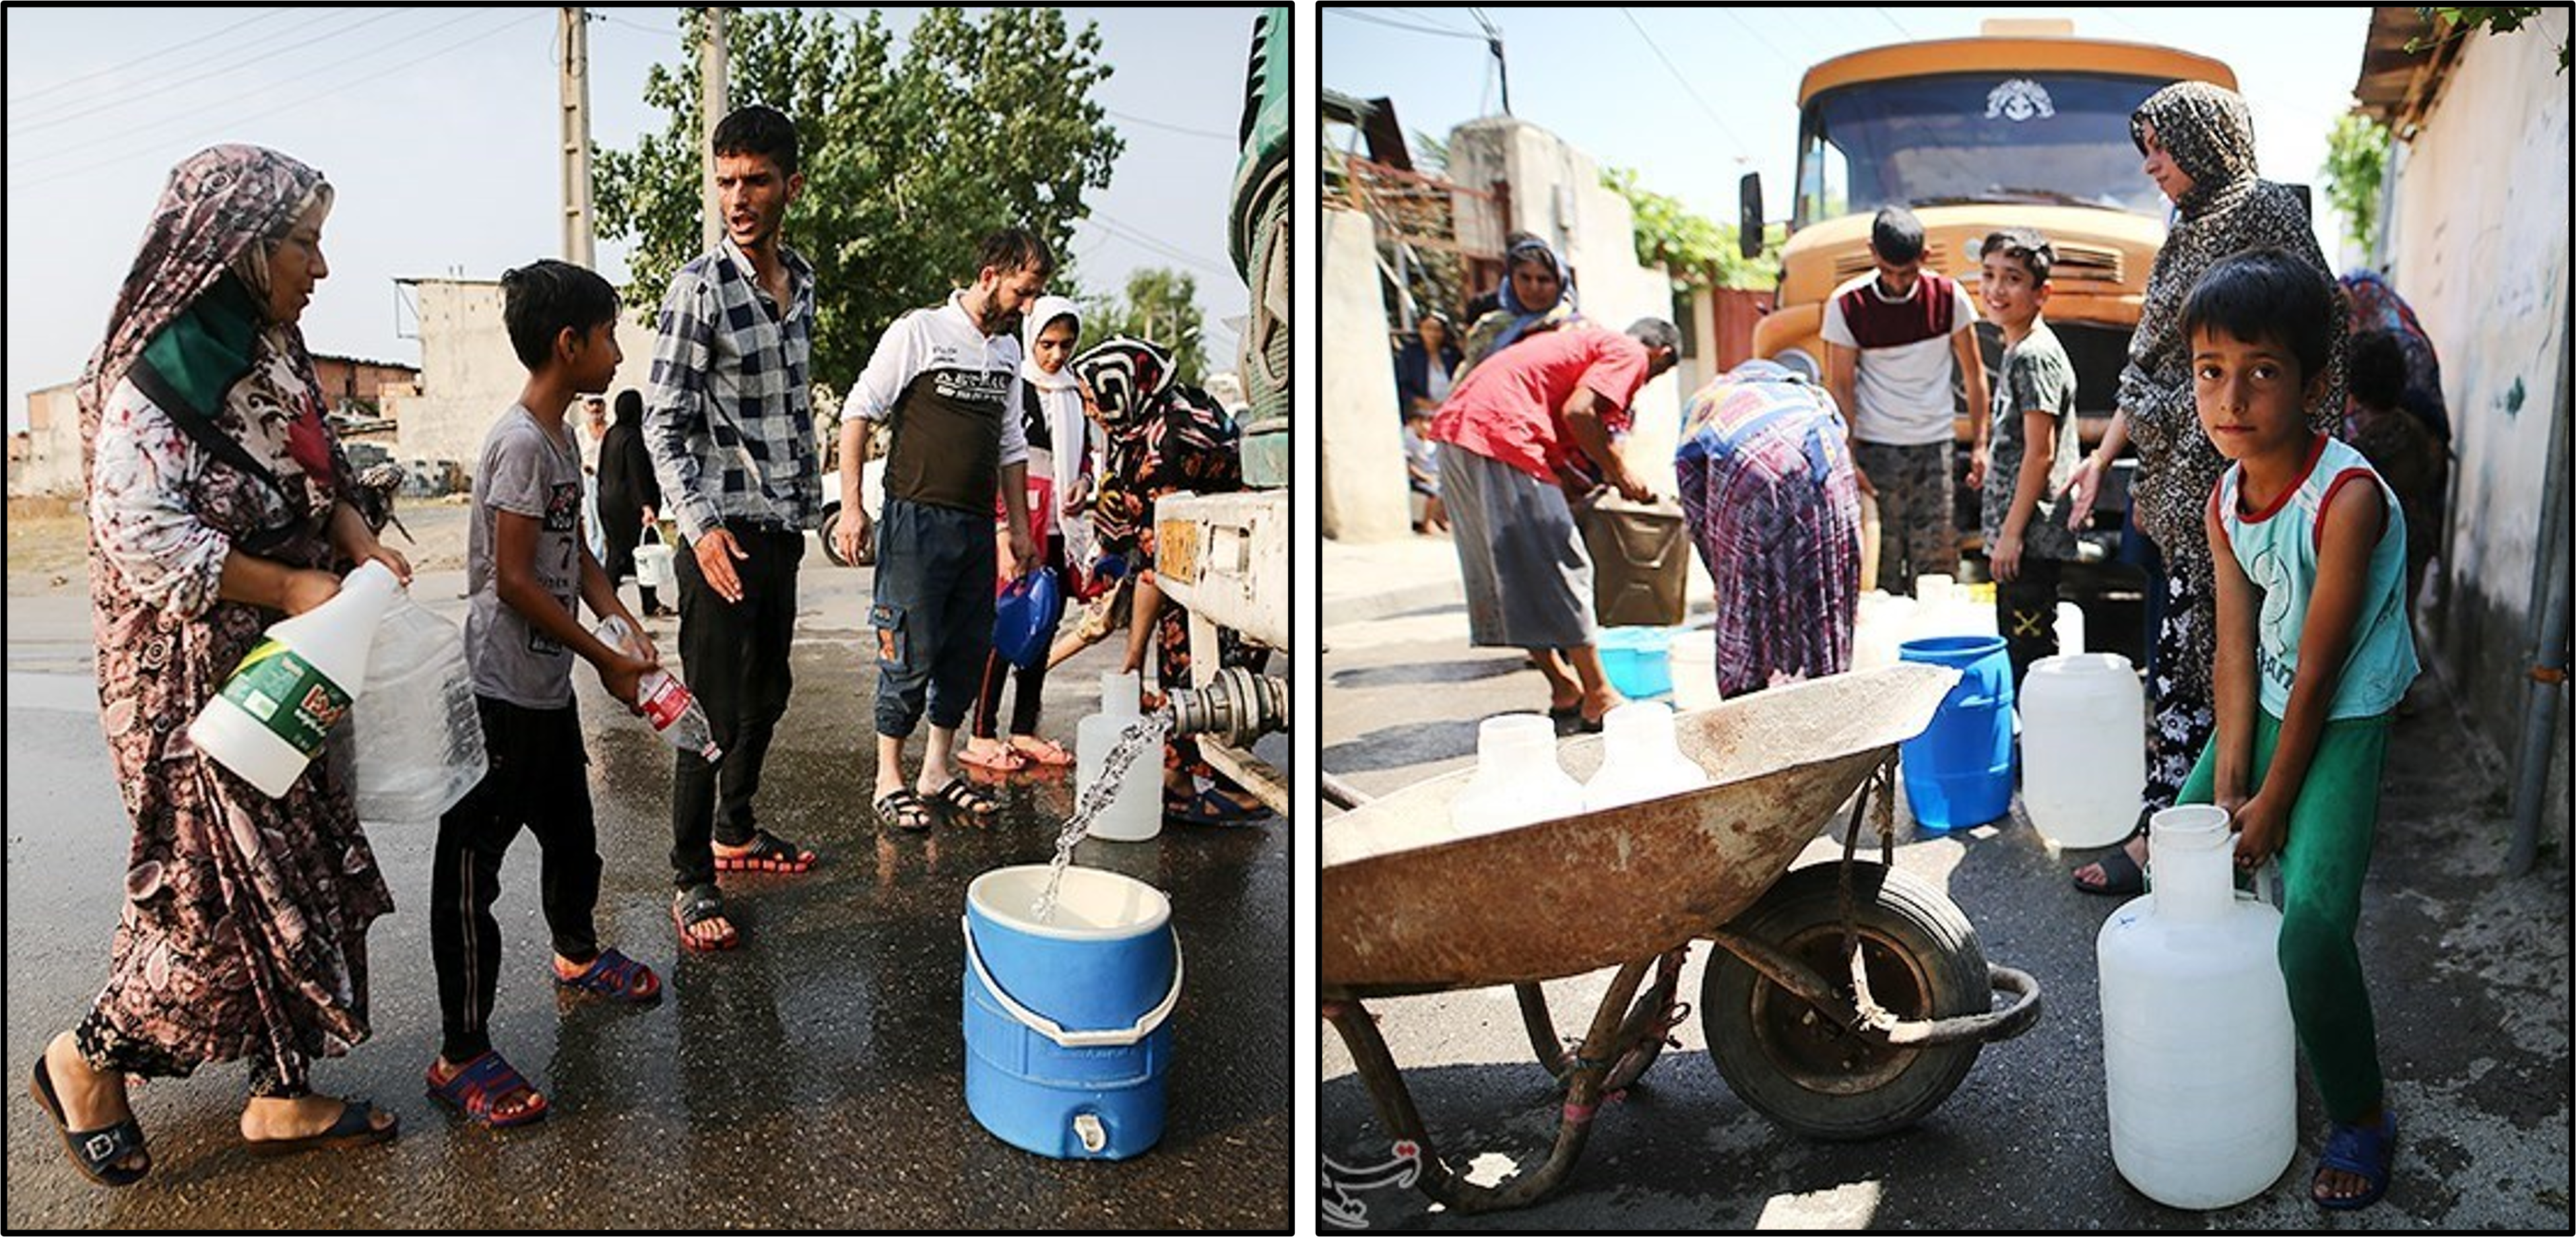 Residents of the water-deprived city of Gorgan, capital of Golestan province, fill their bottles and canteens